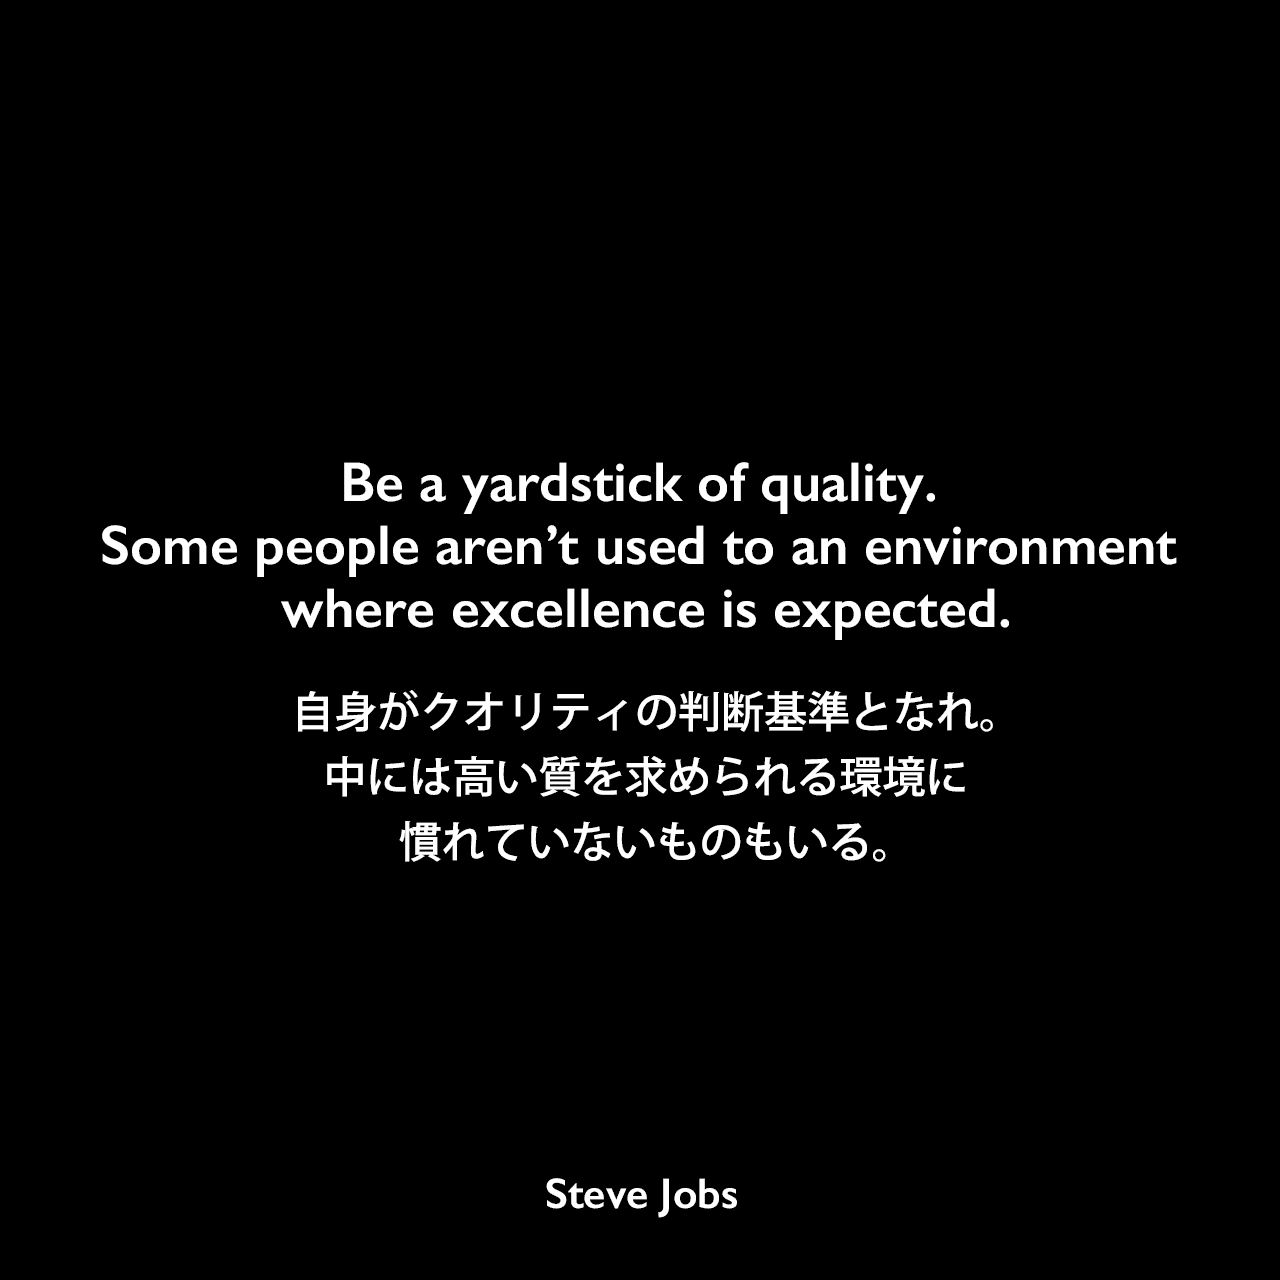 Be a yardstick of quality. Some people aren’t used to an environment where excellence is expected.自身がクオリティの判断基準となれ。中には高い質を求められる環境に慣れていないものもいる。Steve Jobs